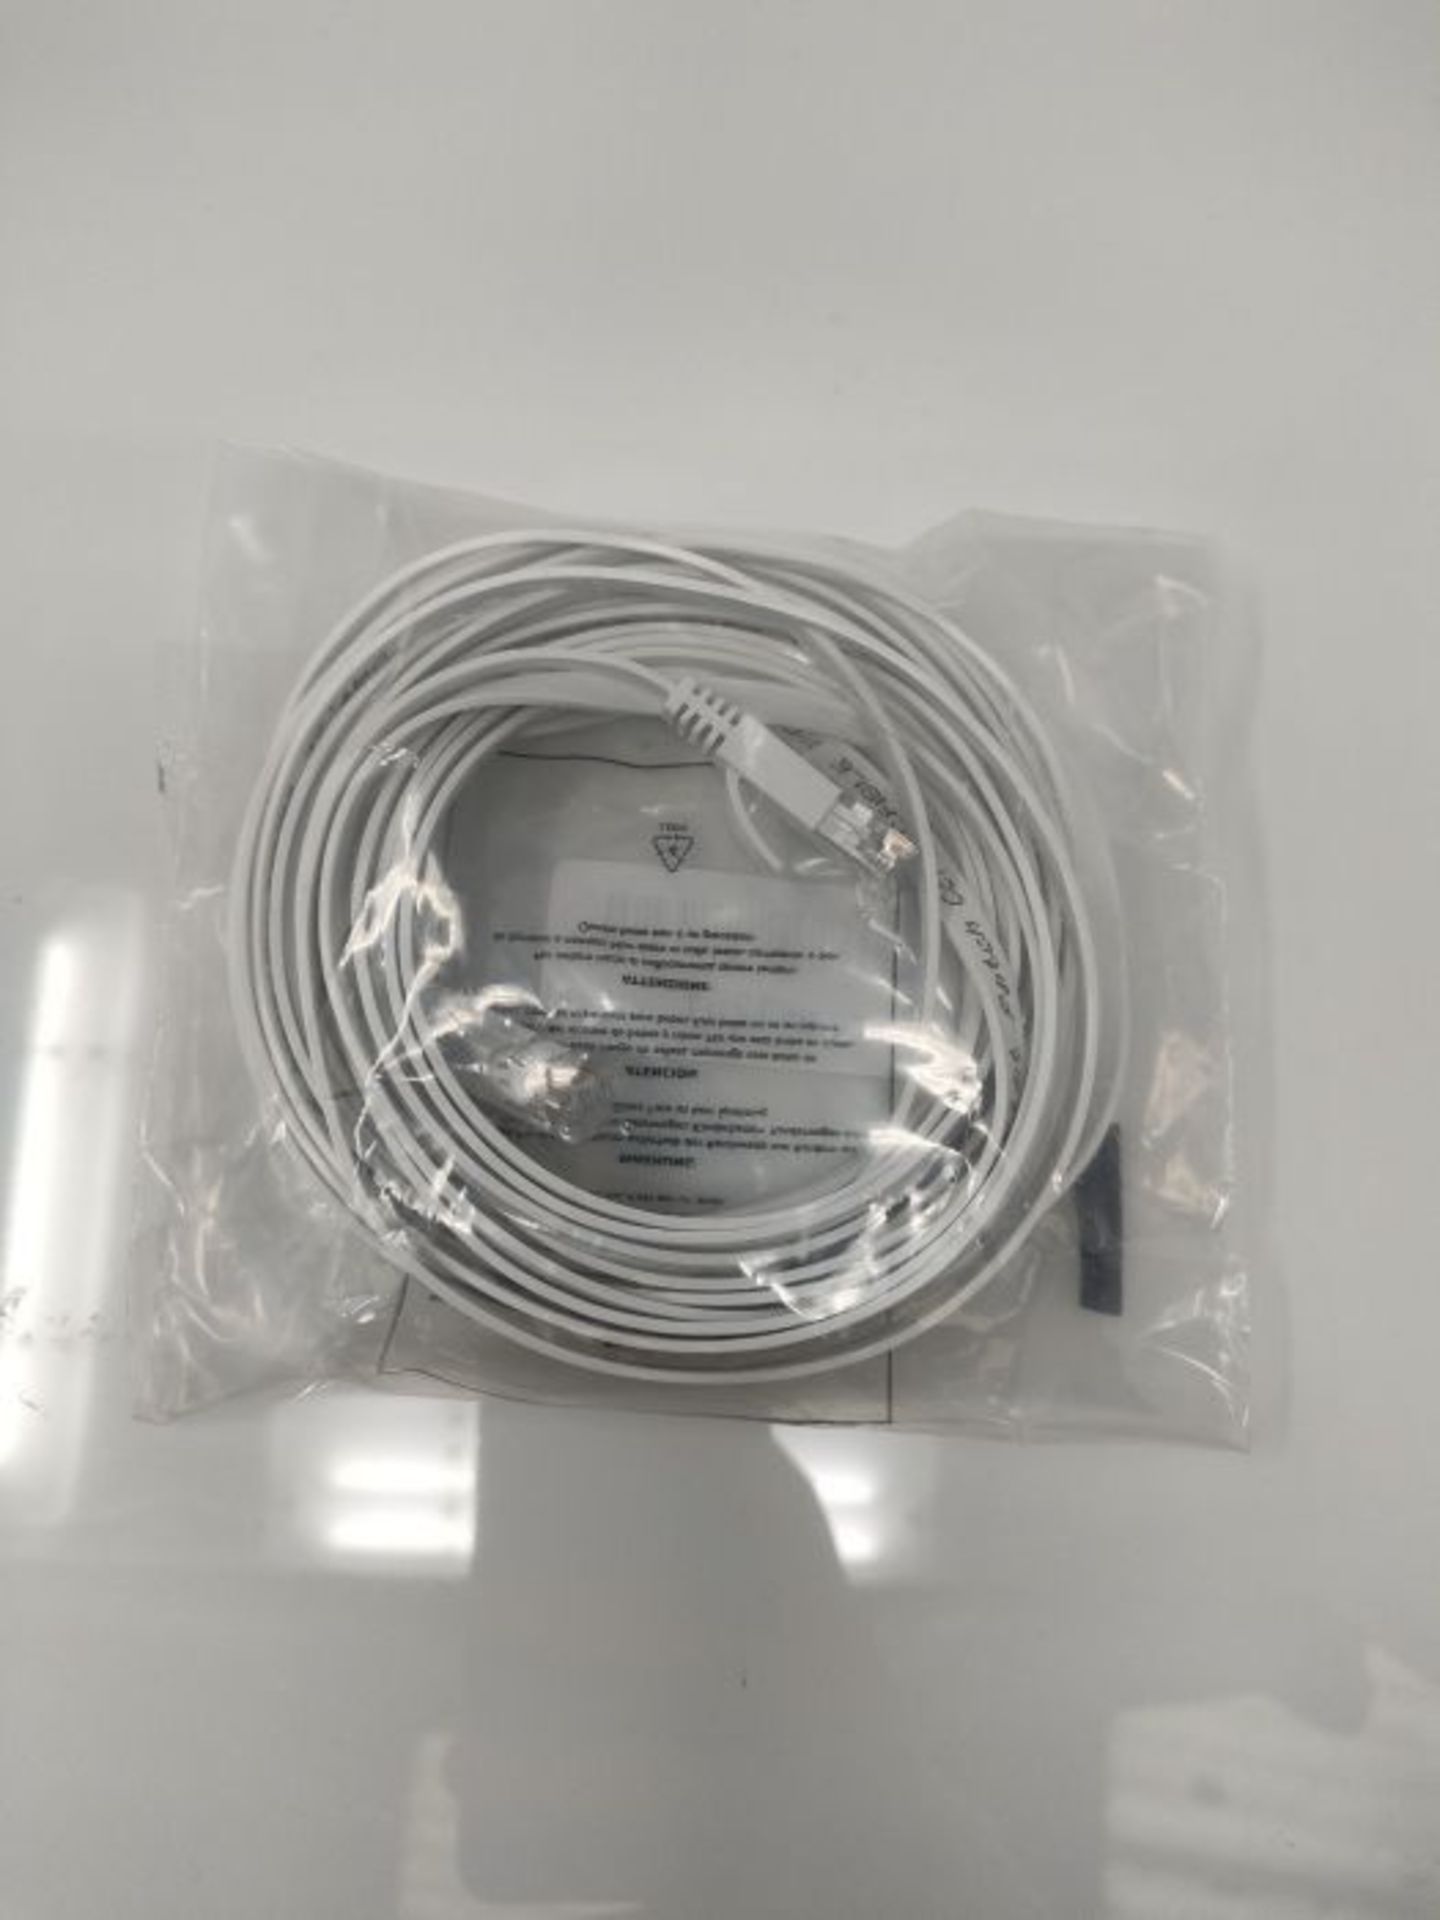 [INCOMPLETE] Lemeend Ethernet Cable 5m,Cat6 Gigabit Lan Network RJ45 High-Speed Patch - Image 2 of 3